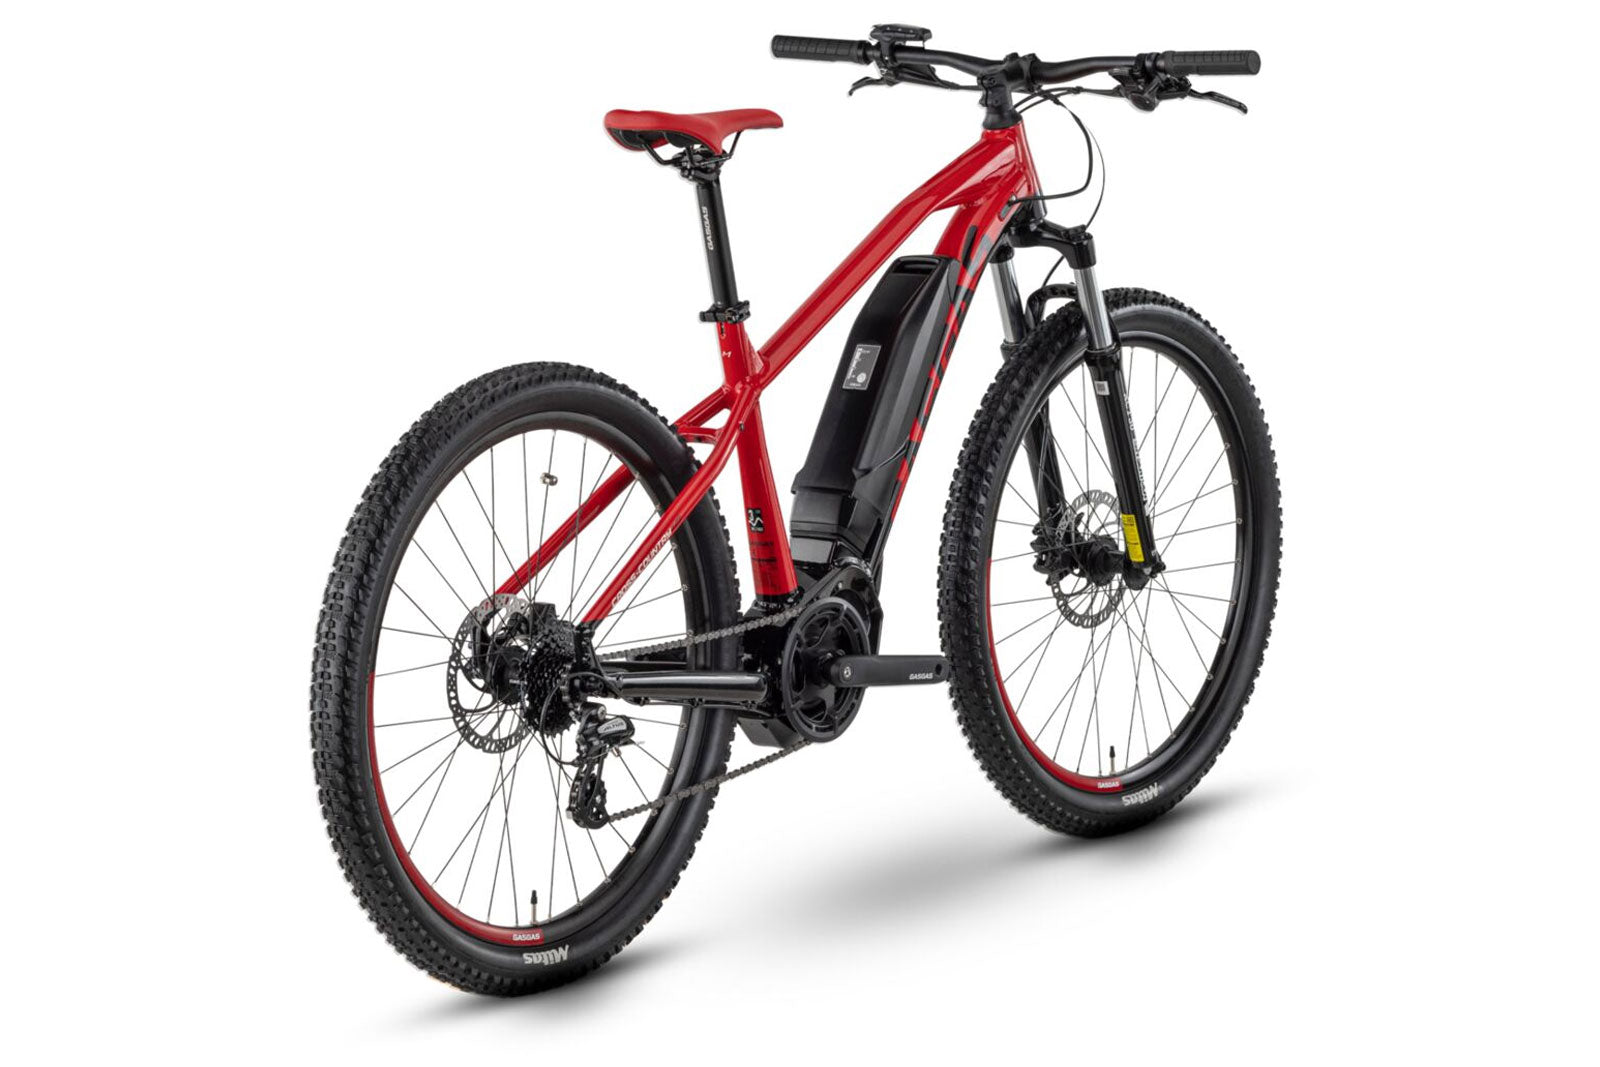 GasGas G Cross Country 1.0 E-Bicycle (Small 40cm)